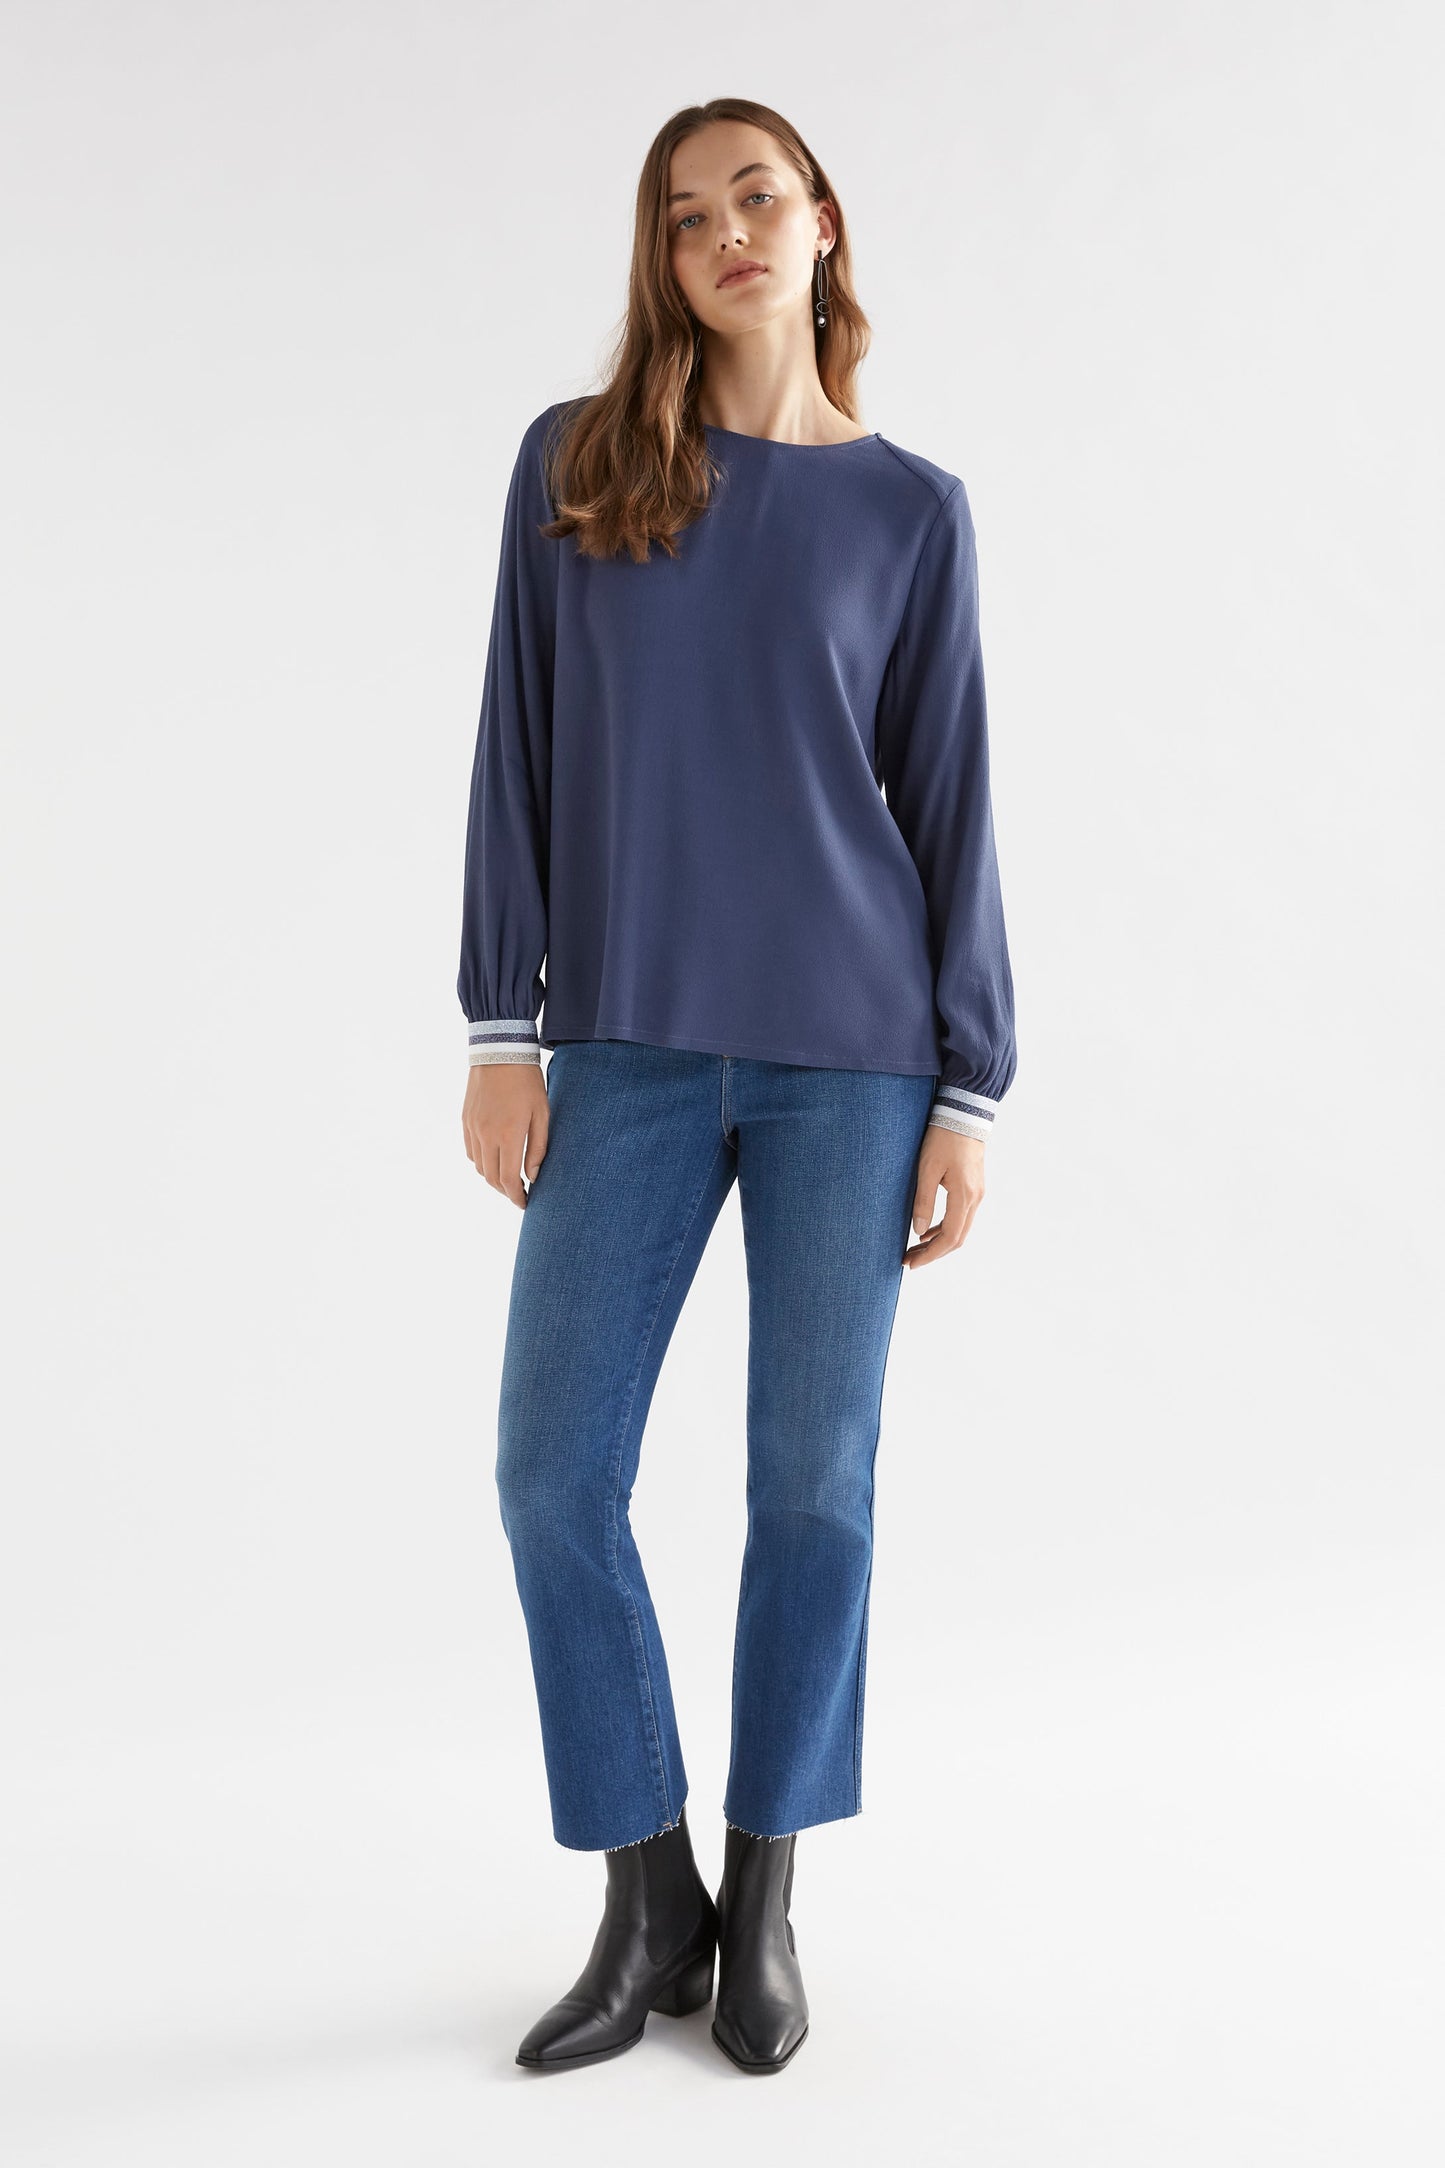 Odin Round Neck Long Sleeve Top with Lurex Elastic Cuff Model Full Body | SLATE BLUE